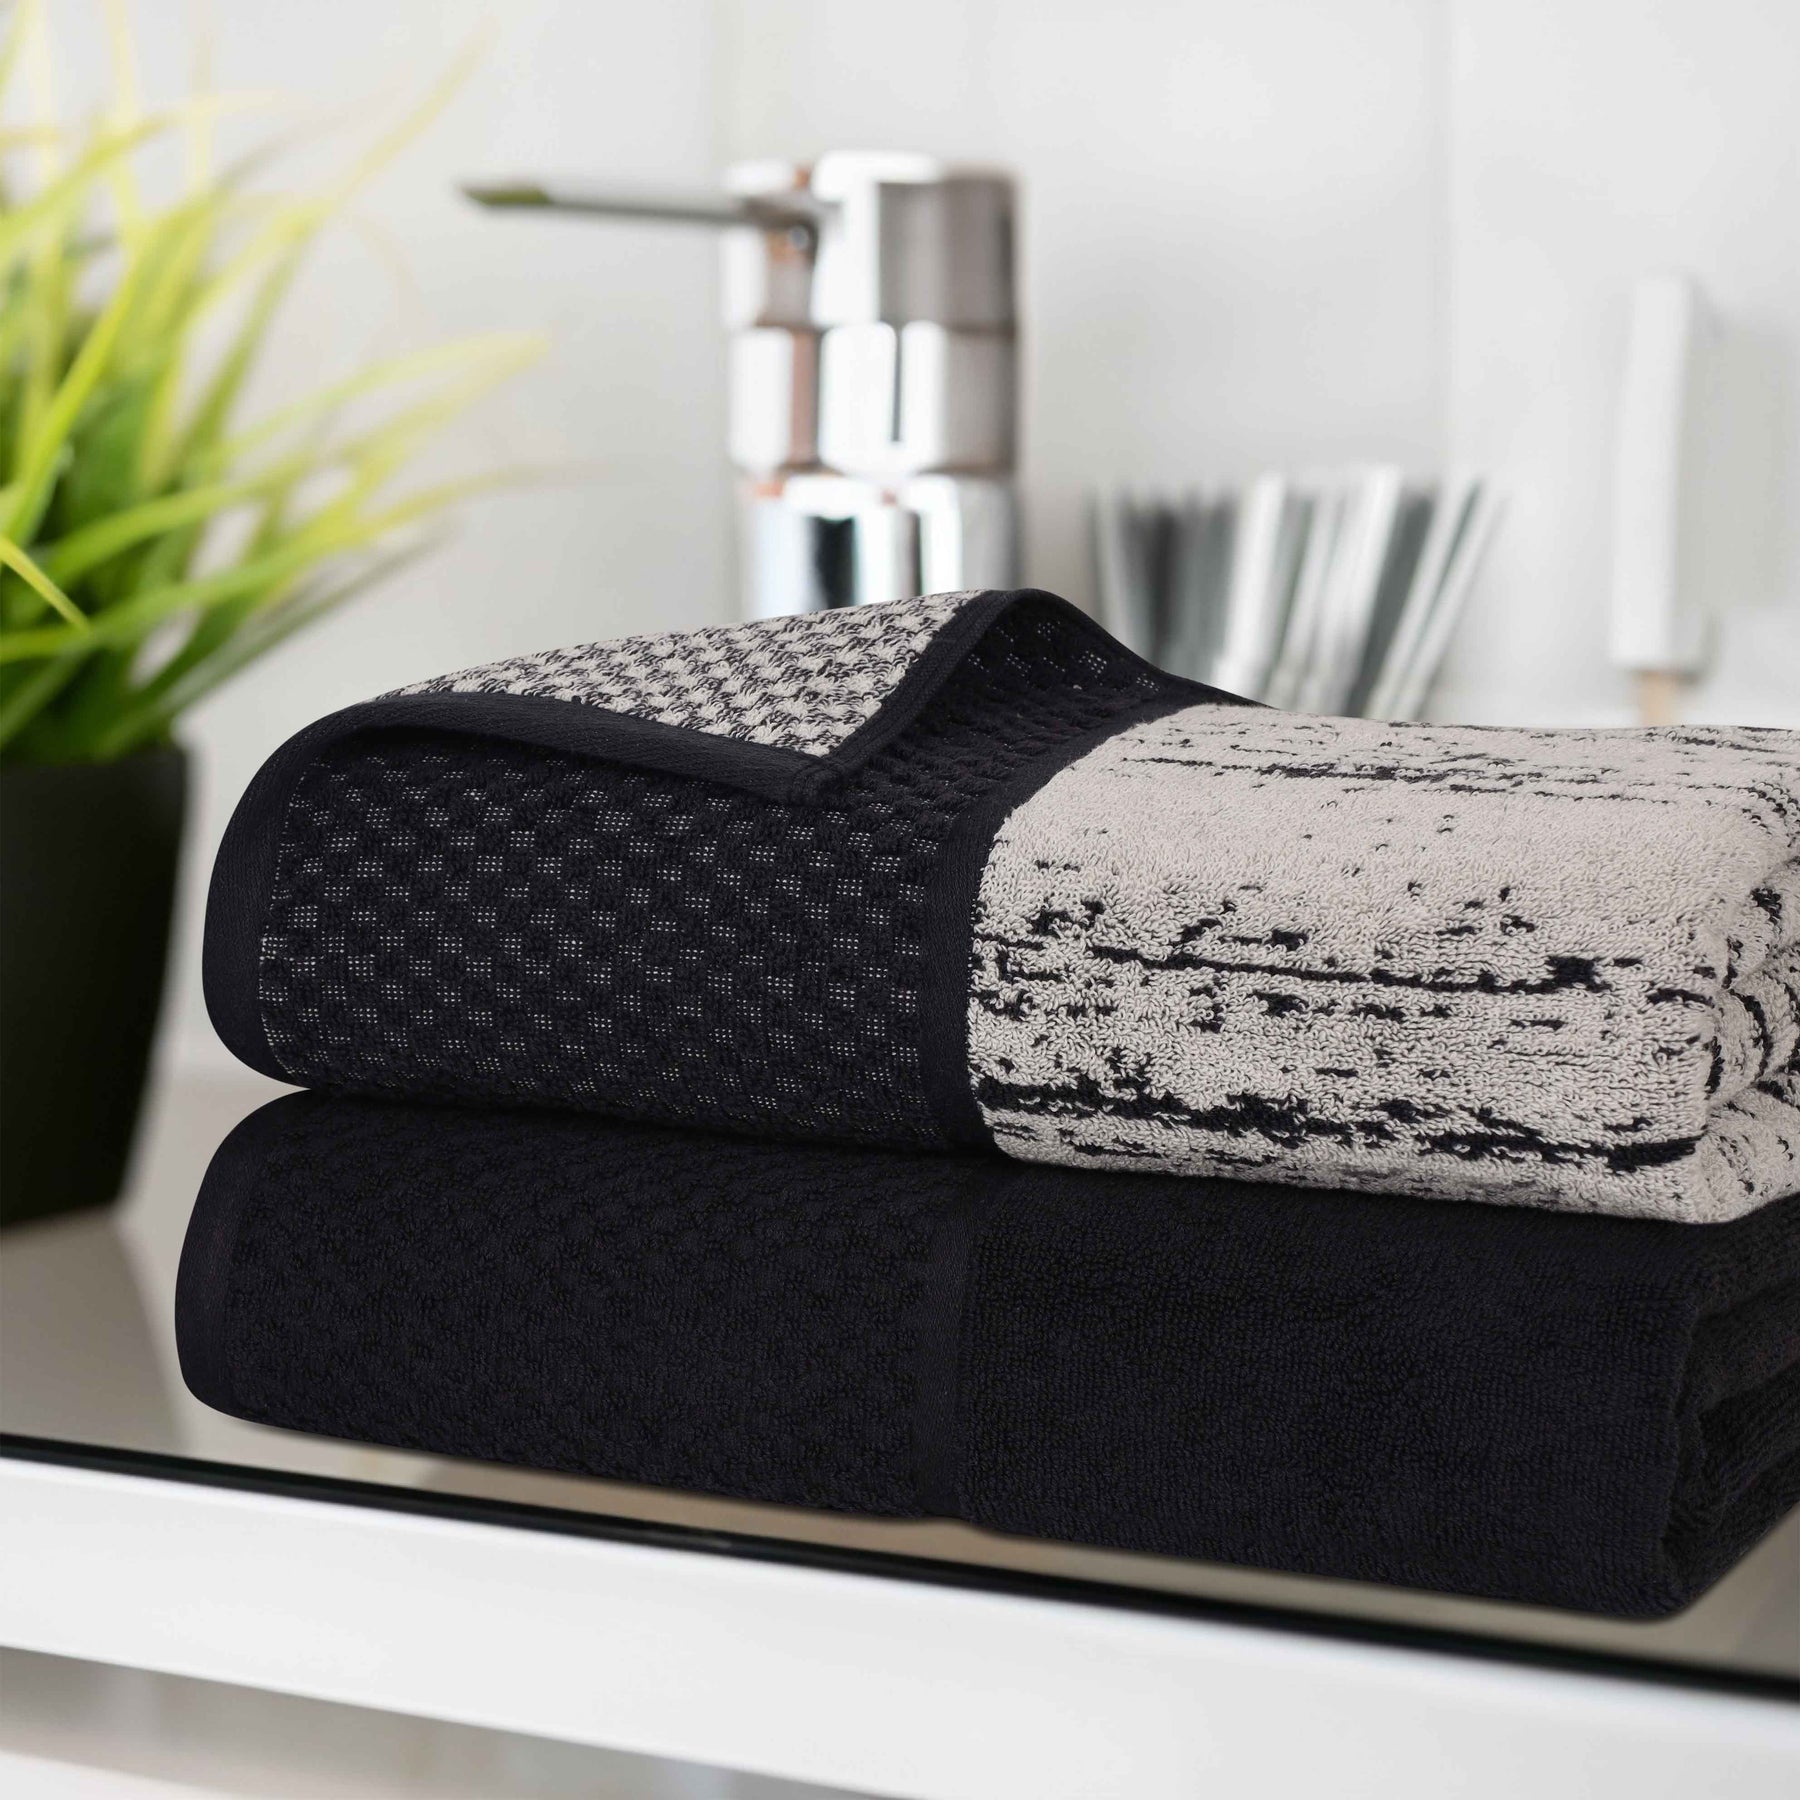 Lodie Cotton Jacquard Solid and Two-Toned Bath Sheet - Black-Ivory